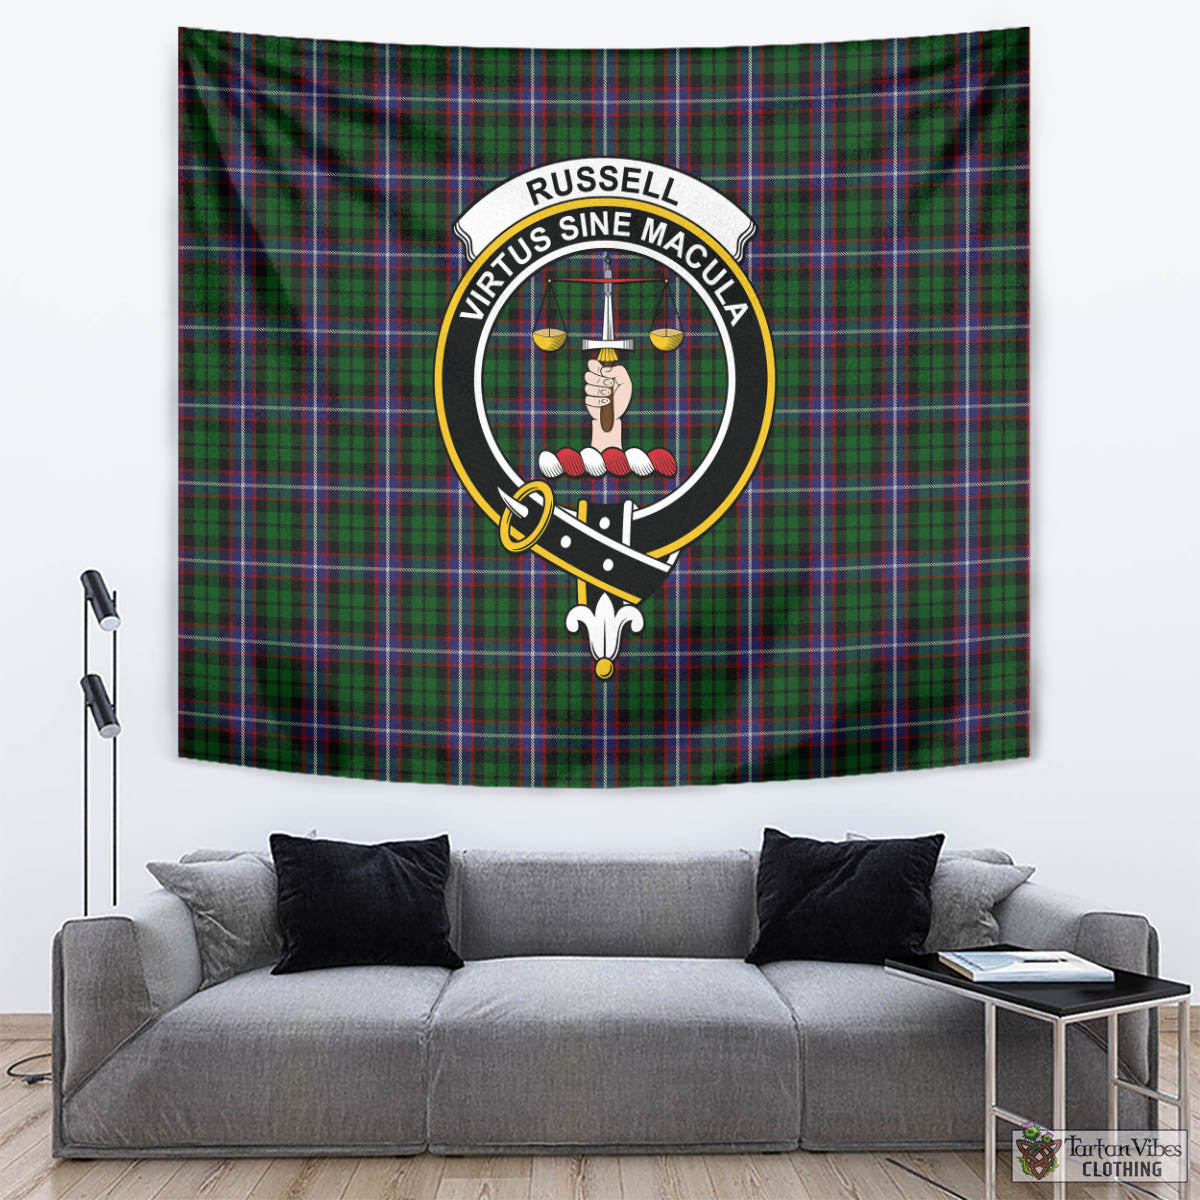 Tartan Vibes Clothing Russell Tartan Tapestry Wall Hanging and Home Decor for Room with Family Crest